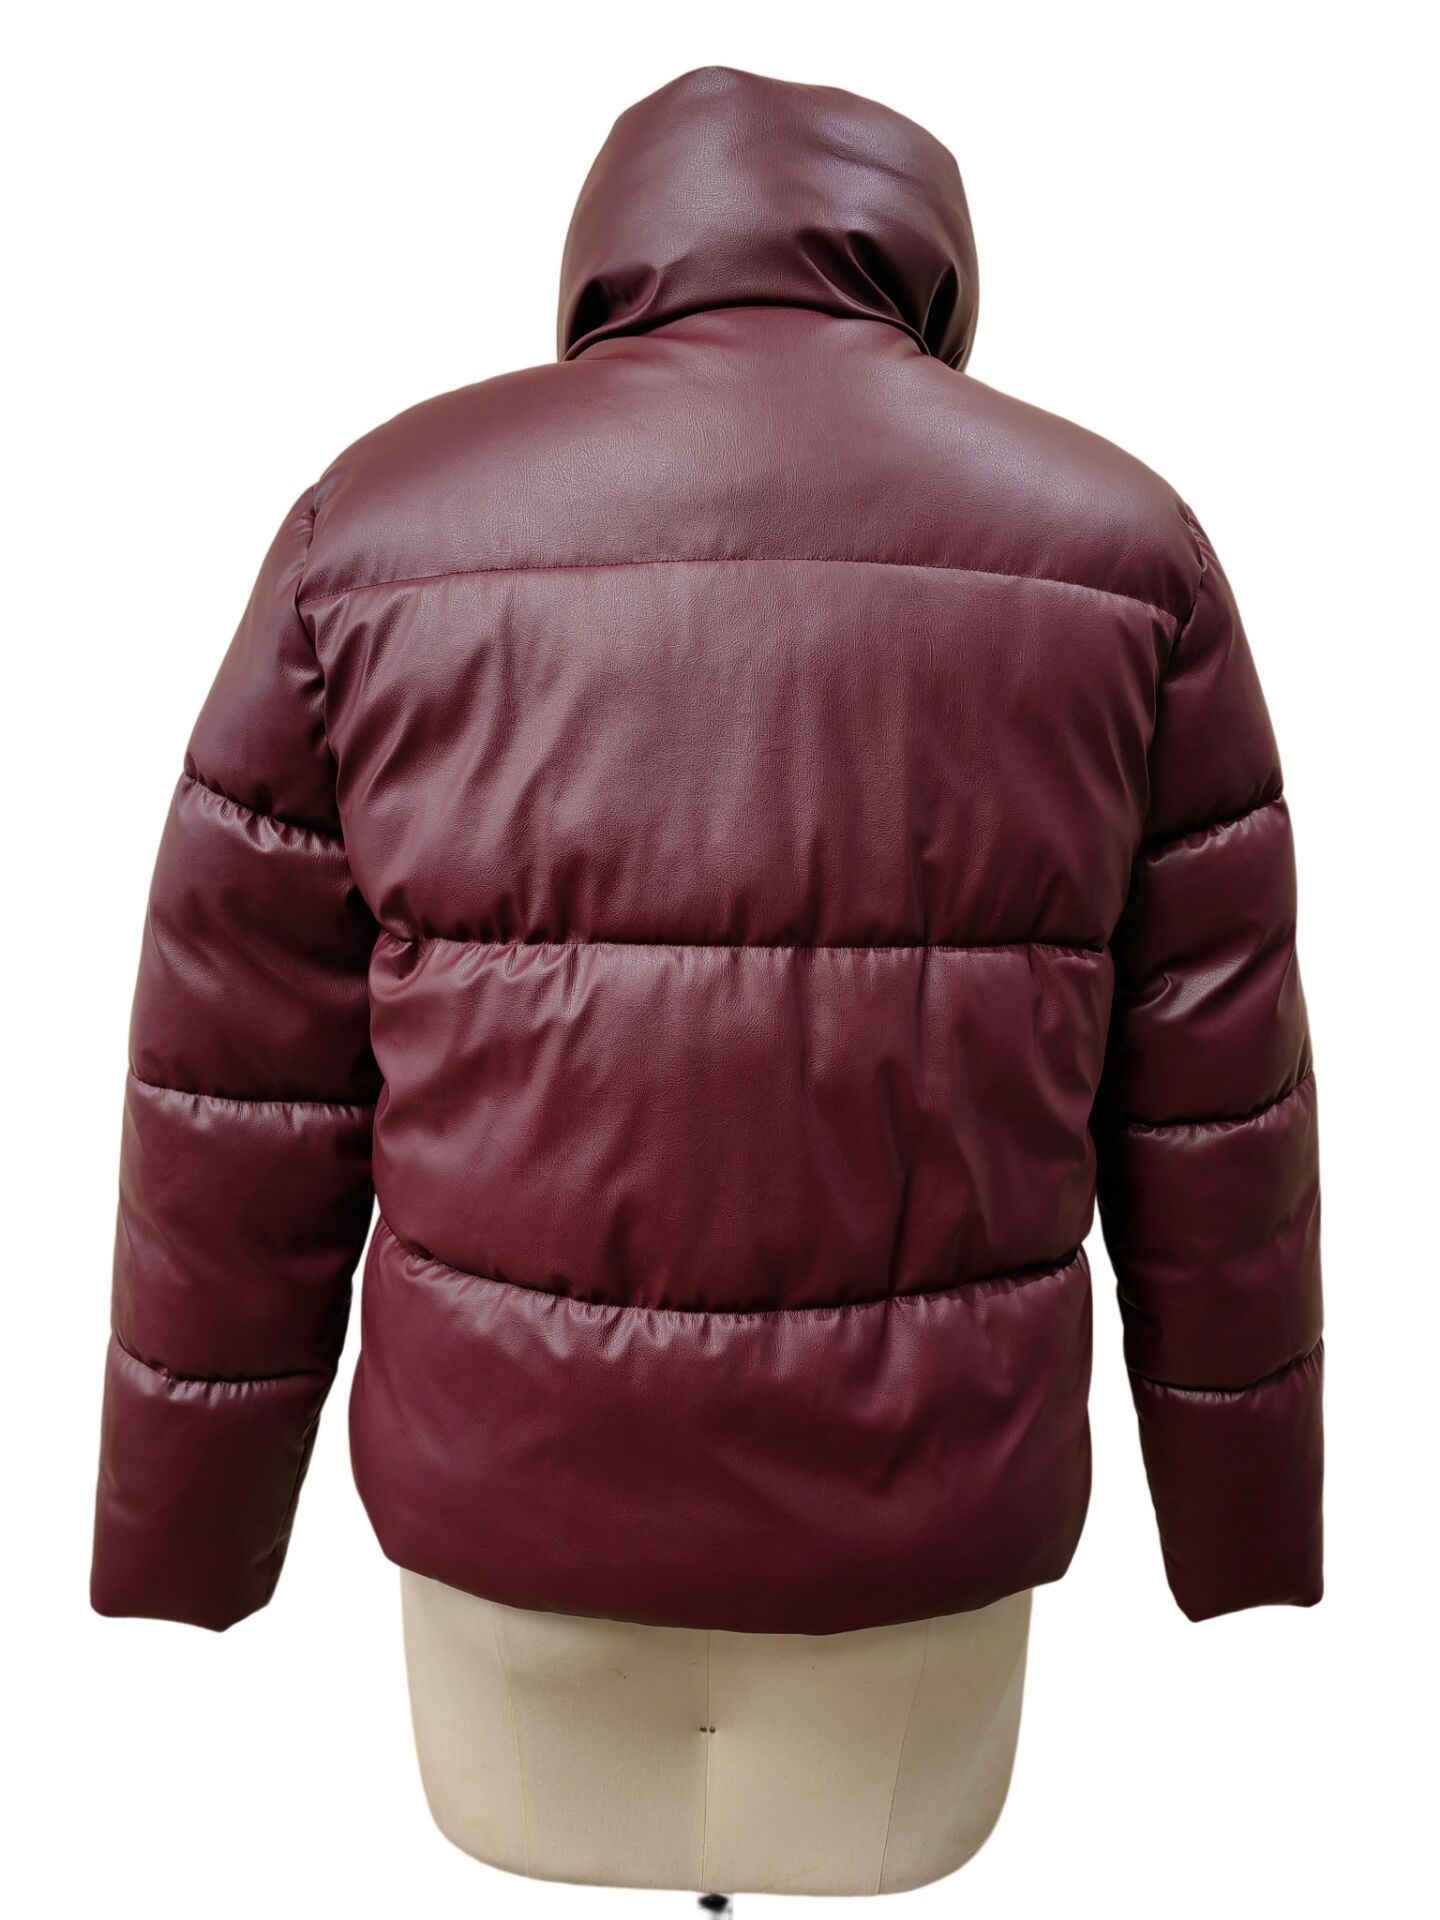 2022 New Design Heavy Padding Jacket Warm Casual Winter Puffer Jacket Chinese Supplier